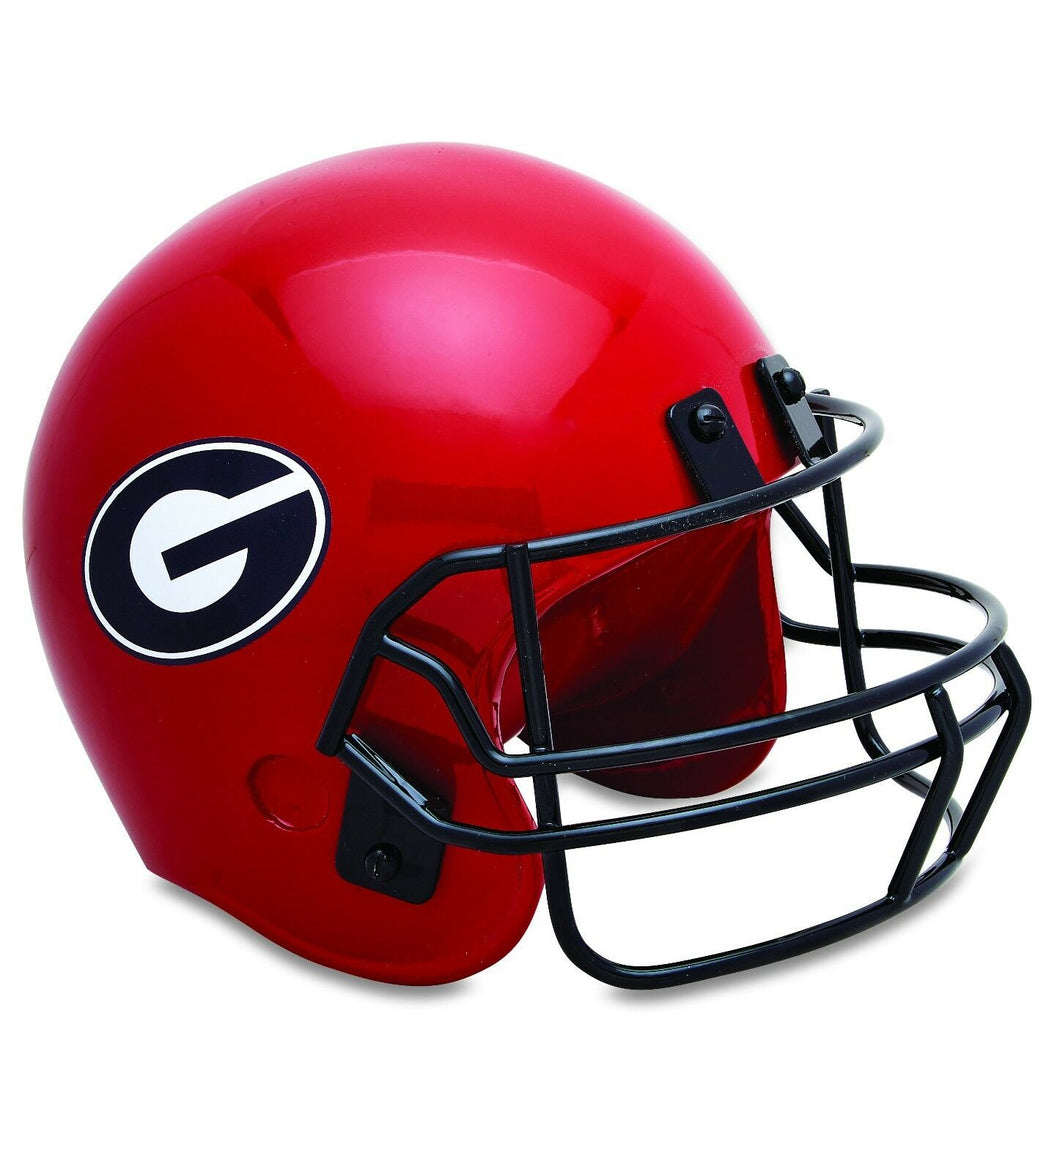 University of Georgia  Football Helmet 225 Cubic Inches Large Cremation Urn